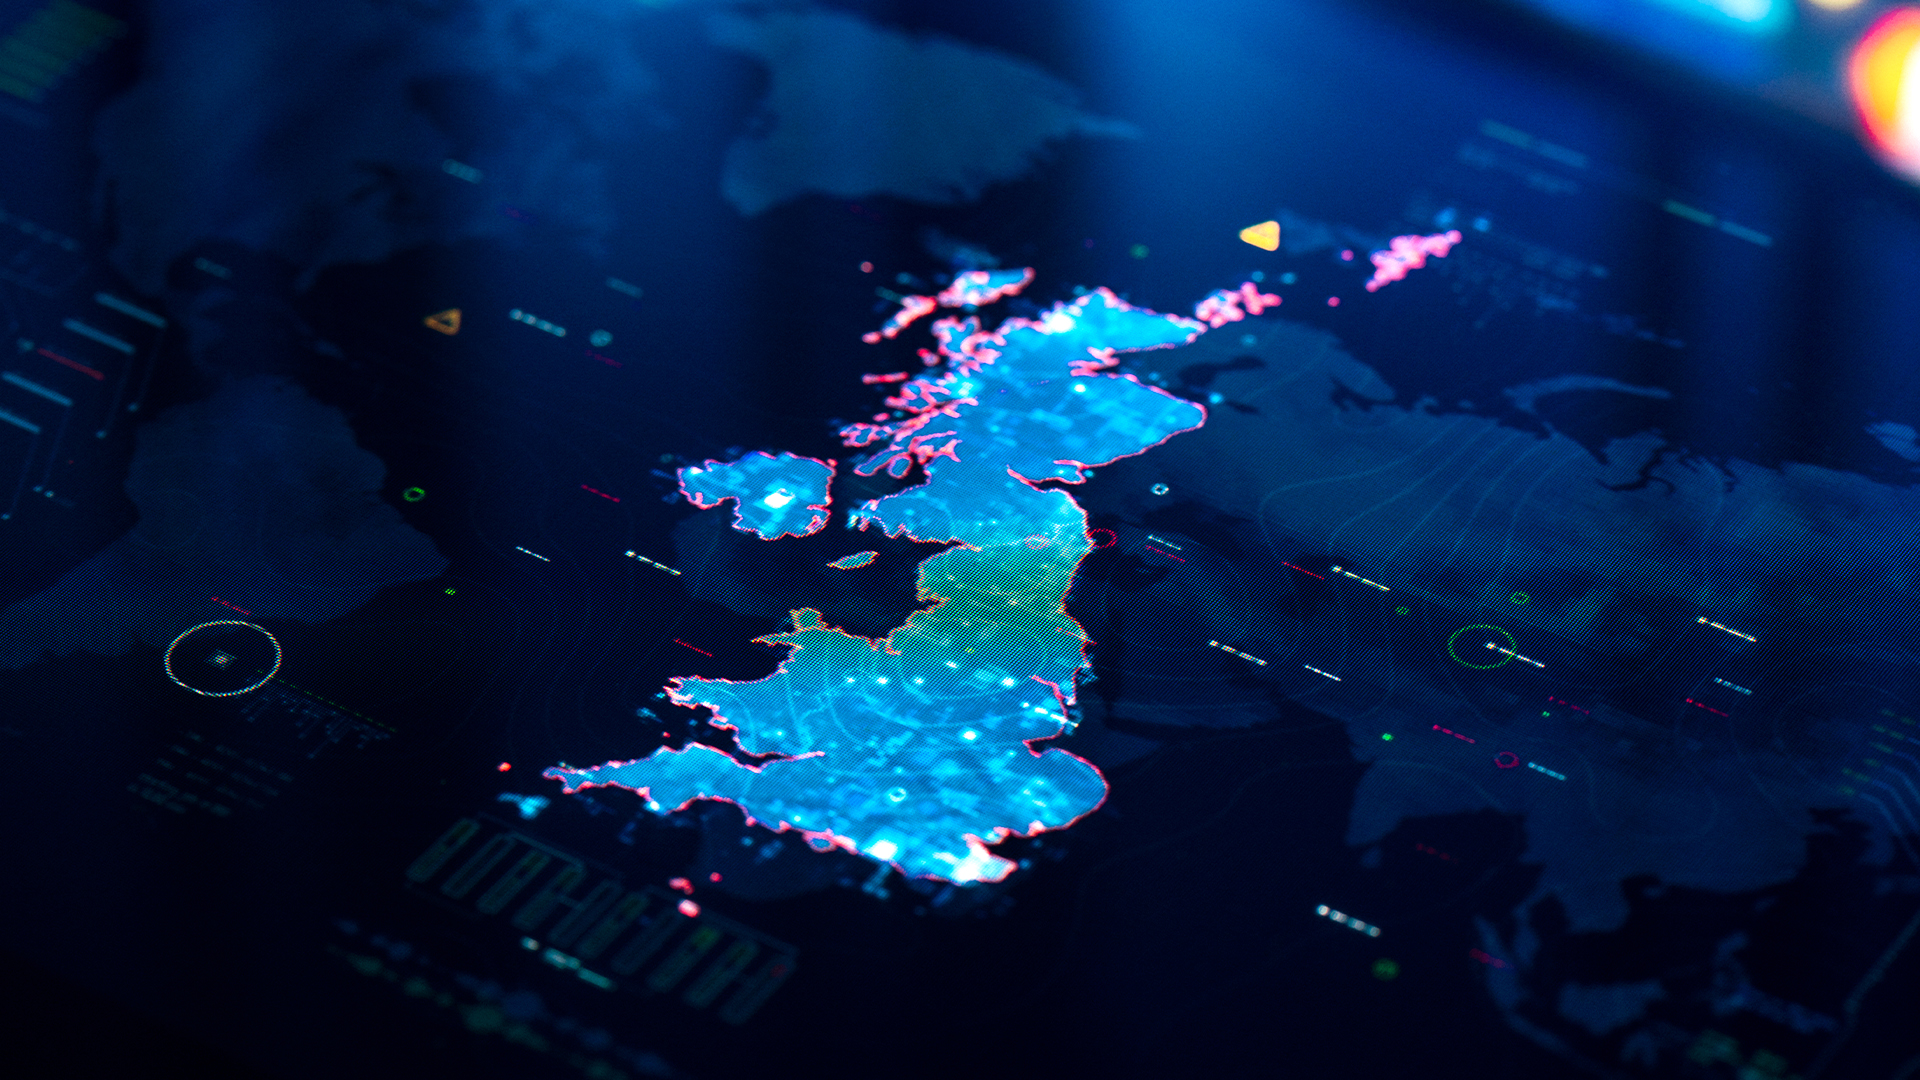 UK tech investment is stagnating, but there are positive signs in regional fundraising